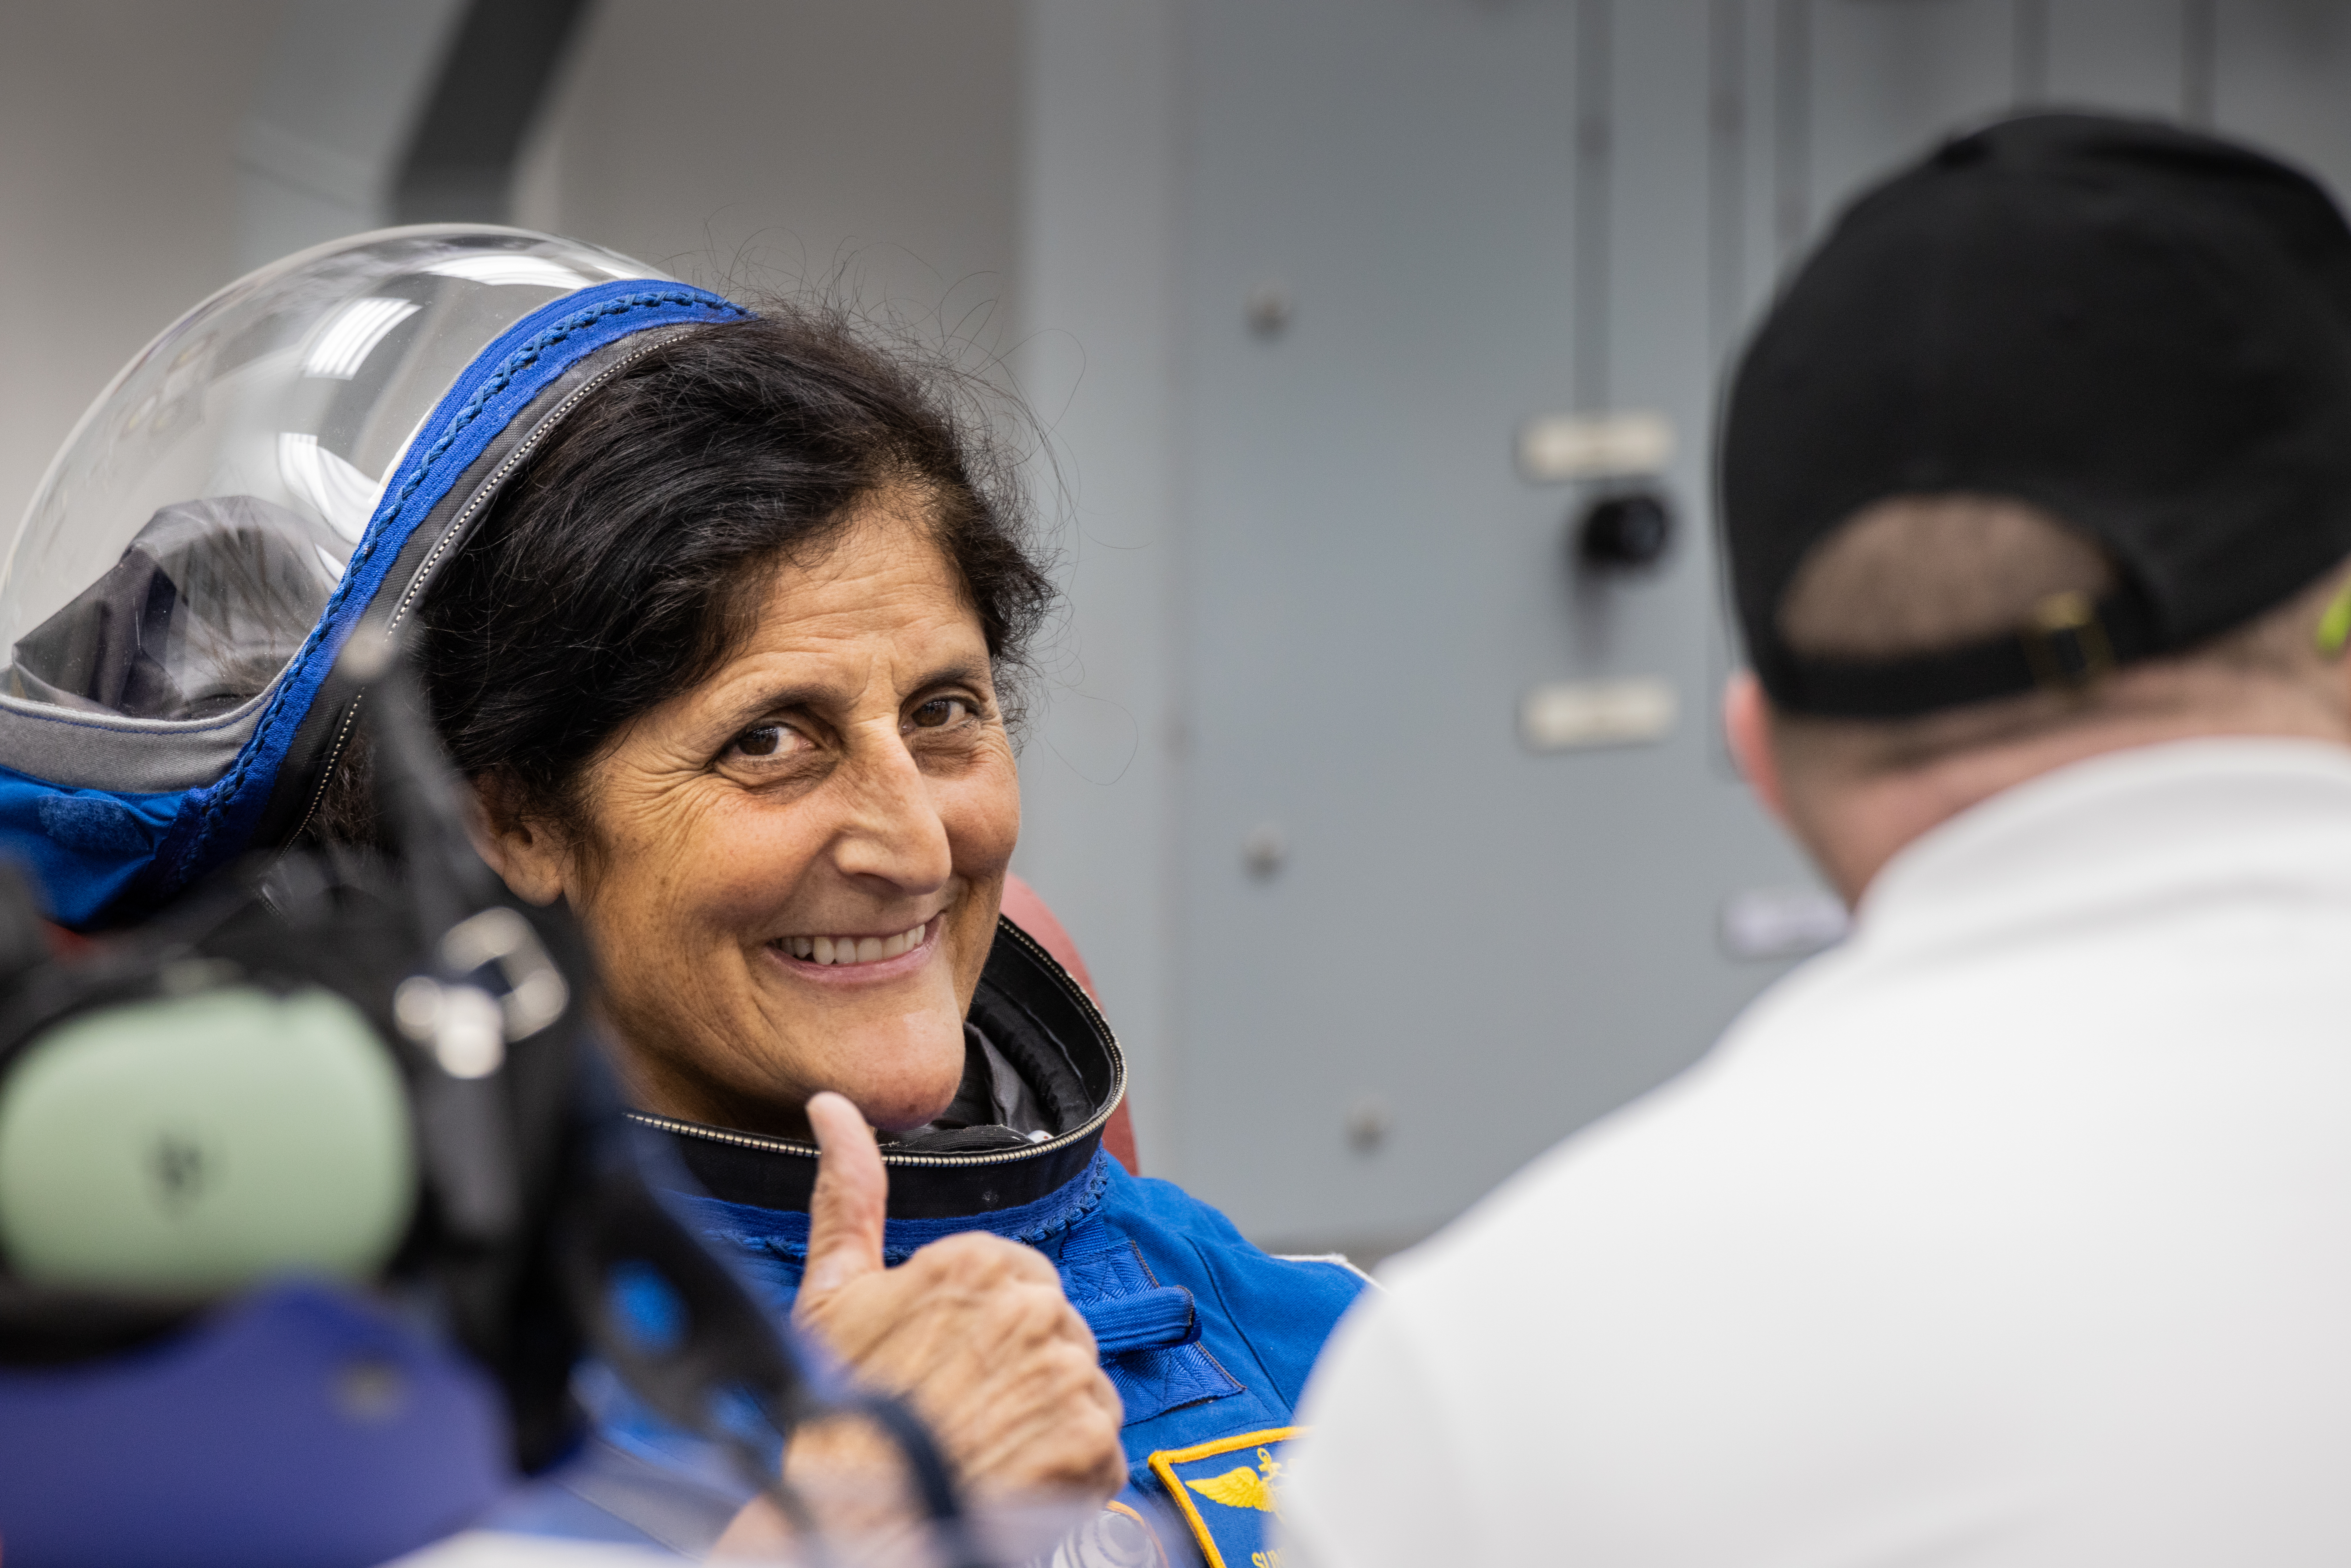 Astronaut Suni Williams (left), an Indian- and Slovene-American woman, smiles and gives a thumbs up to the camera. She wears a blue Boeing spacesuit.